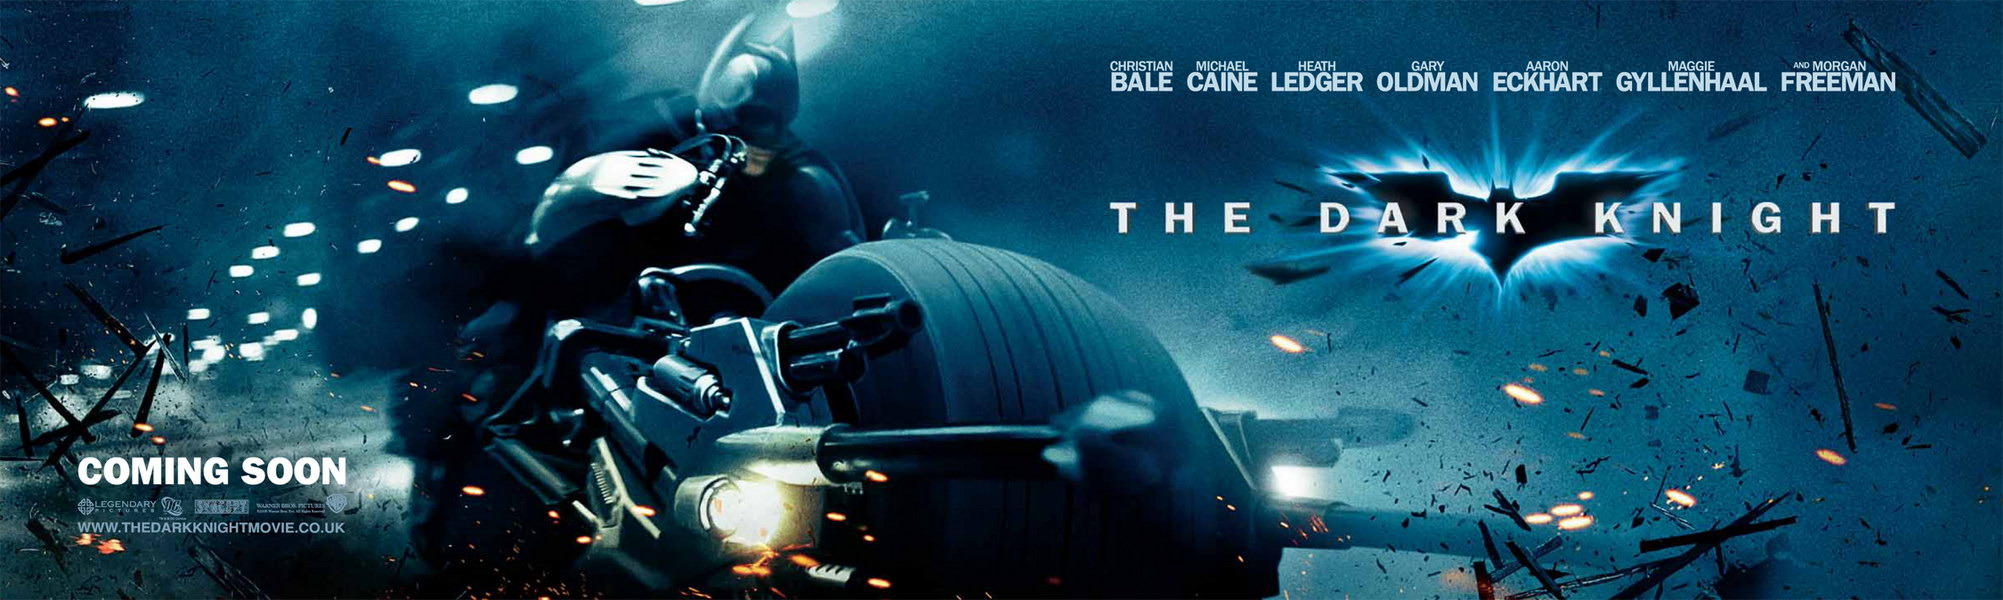 Mega Sized Movie Poster Image for The Dark Knight (#13 of 24)